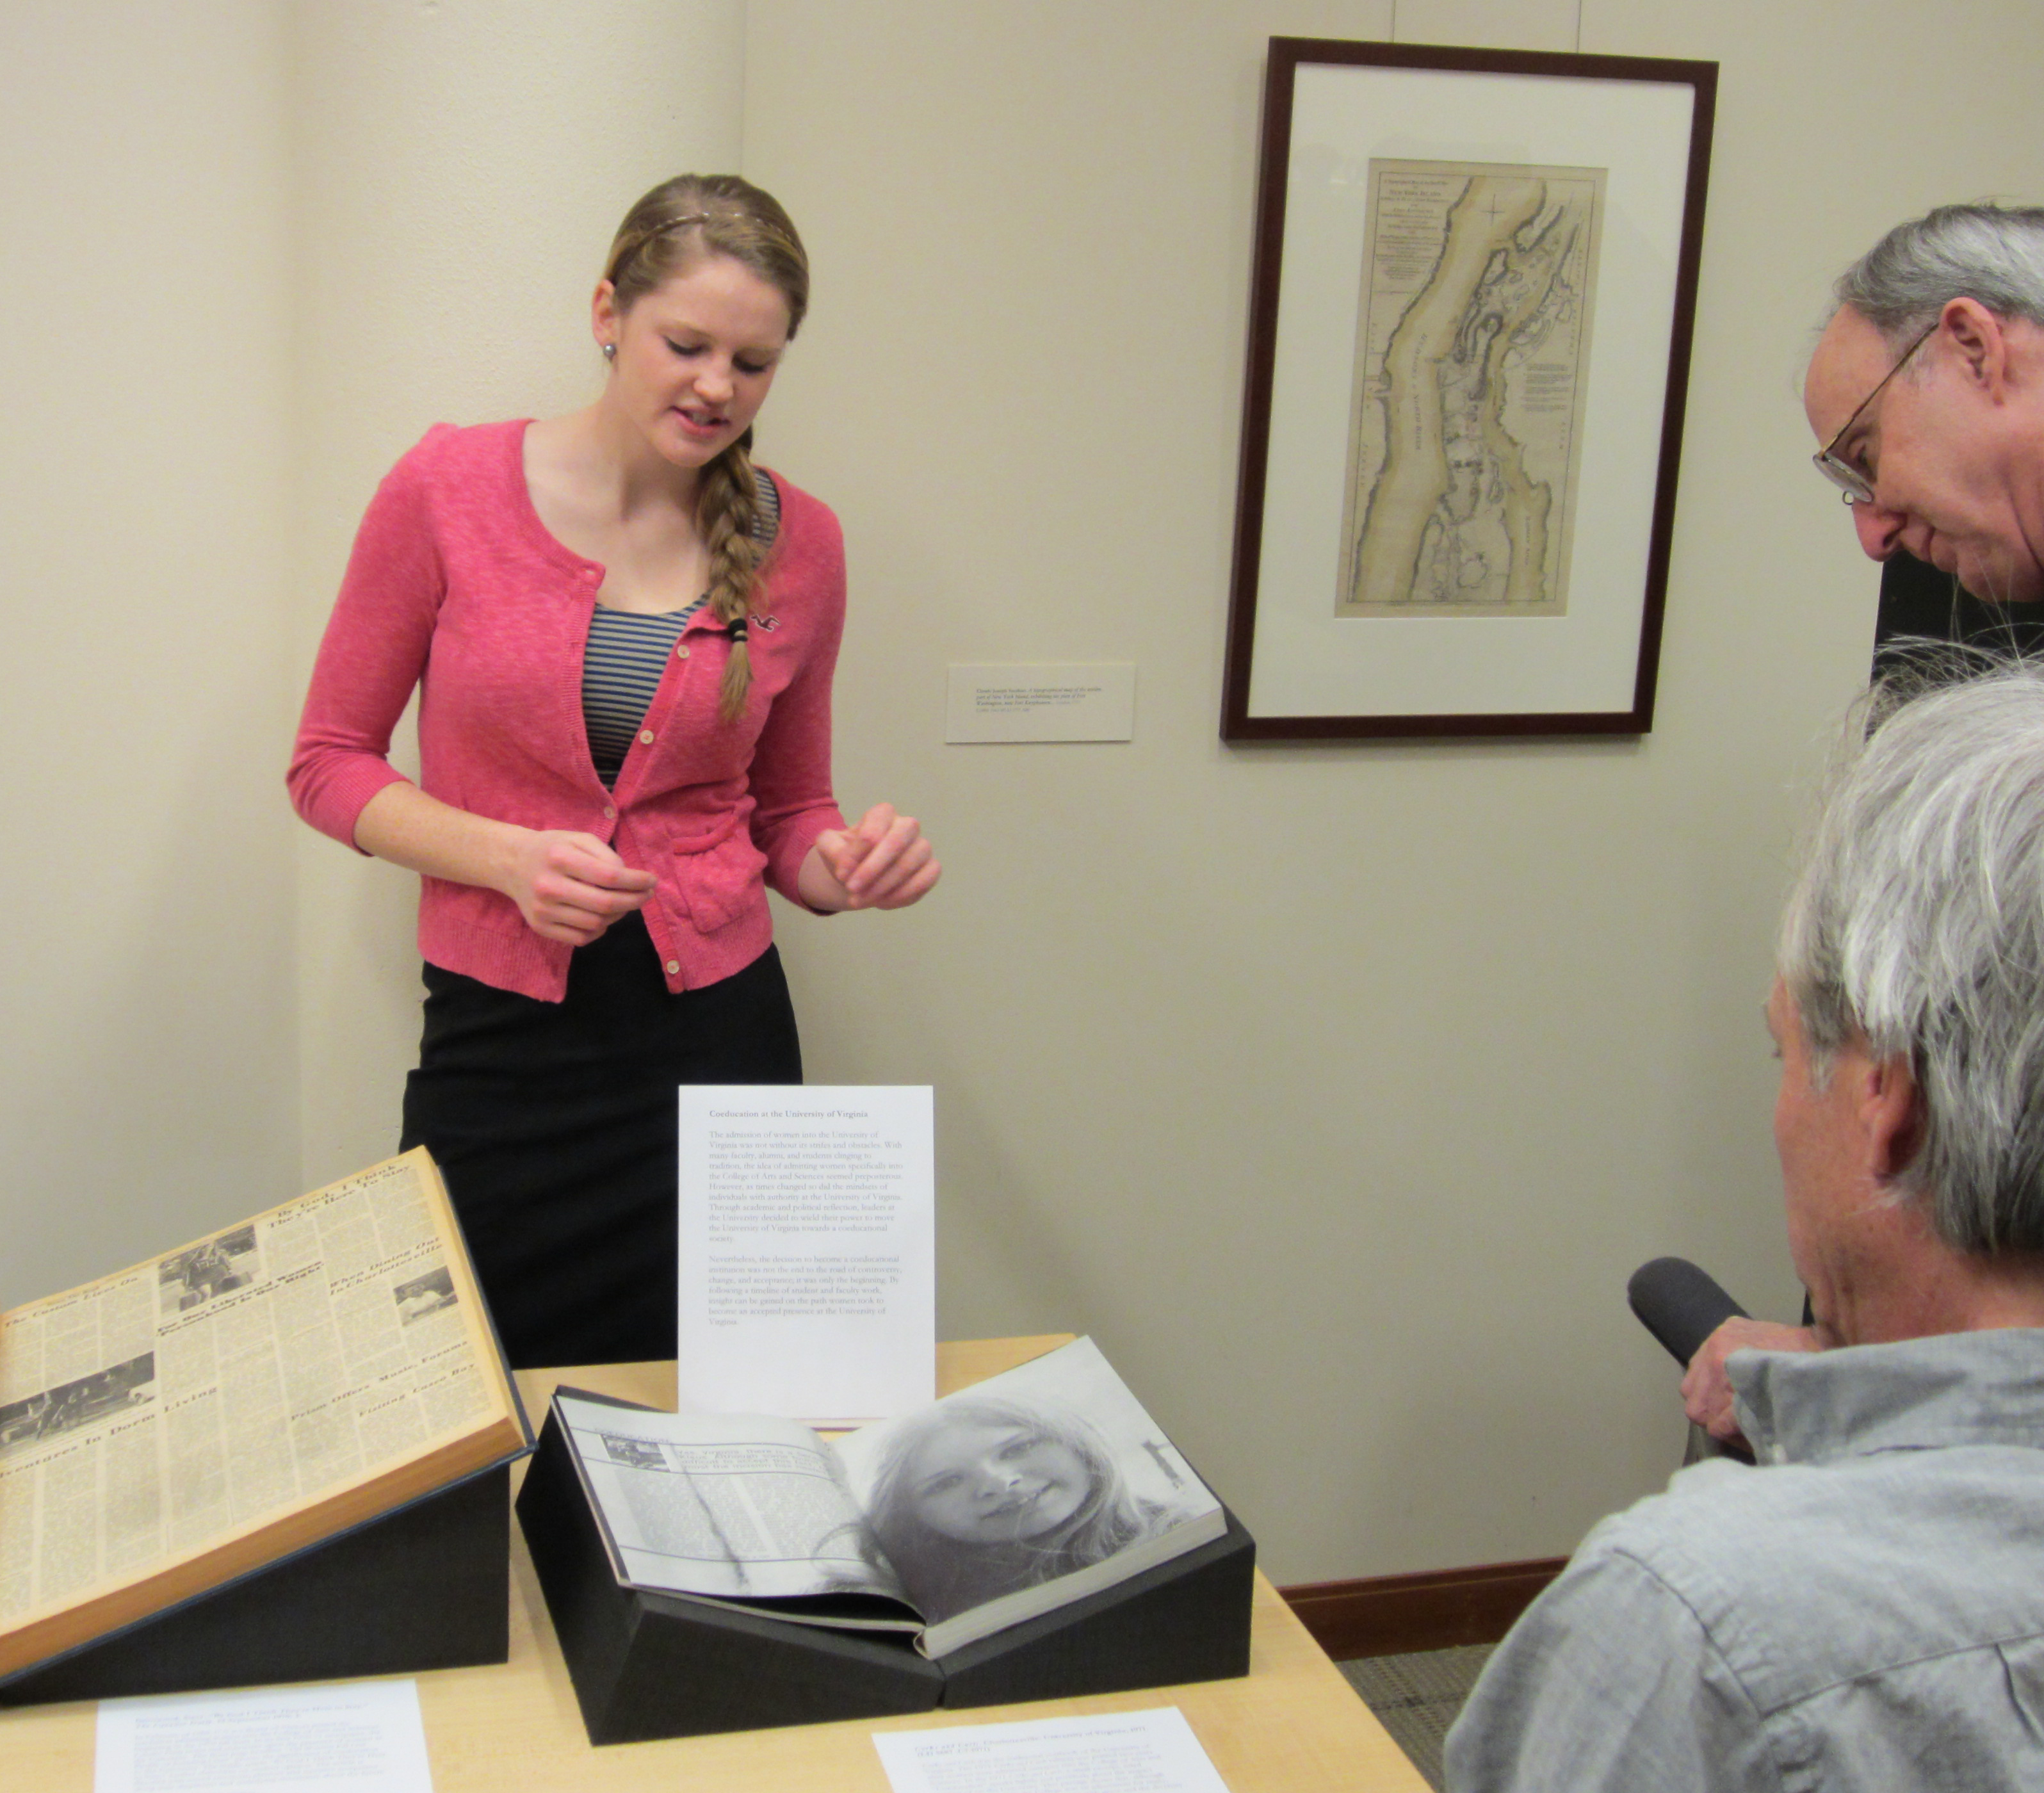 Bethany Ackerman discusses one of her exhibition items with Special Collections staff, November 26, 2013. (Photograph by Petrina Jackson)